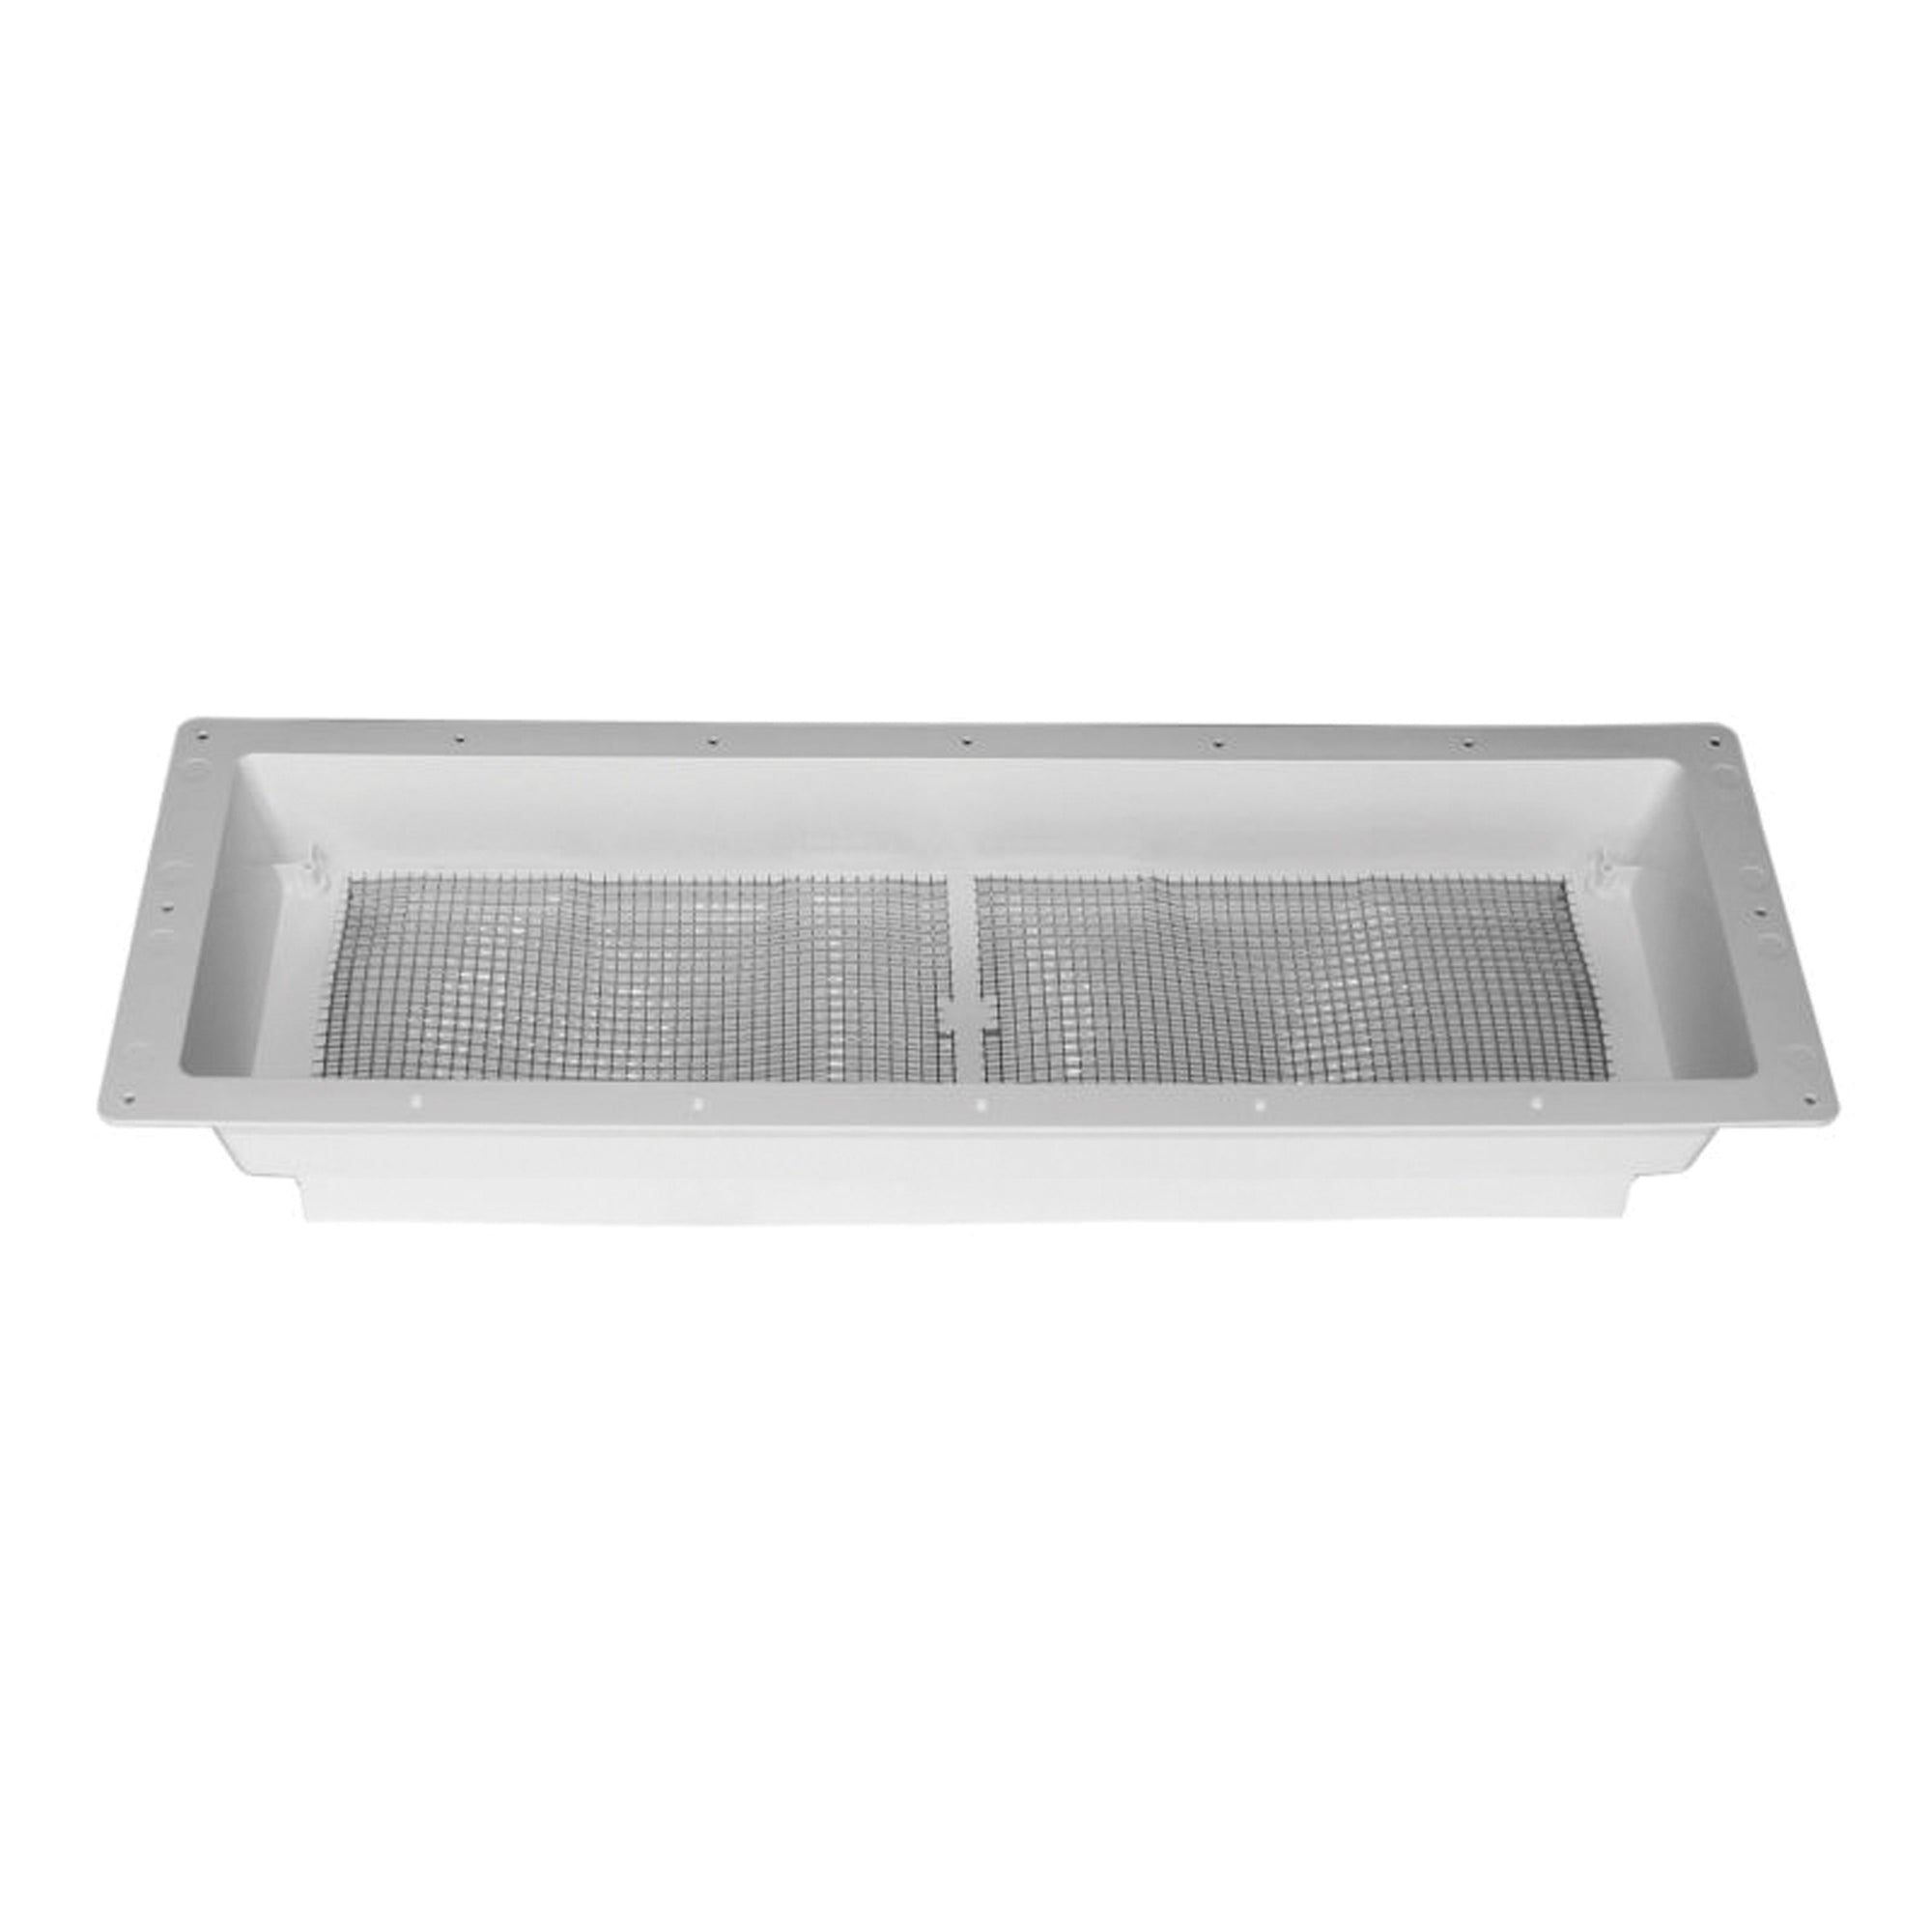 Dometic 3312694.007 Refrigerator Vent Base Only for Complete Vent Kit - Polar White